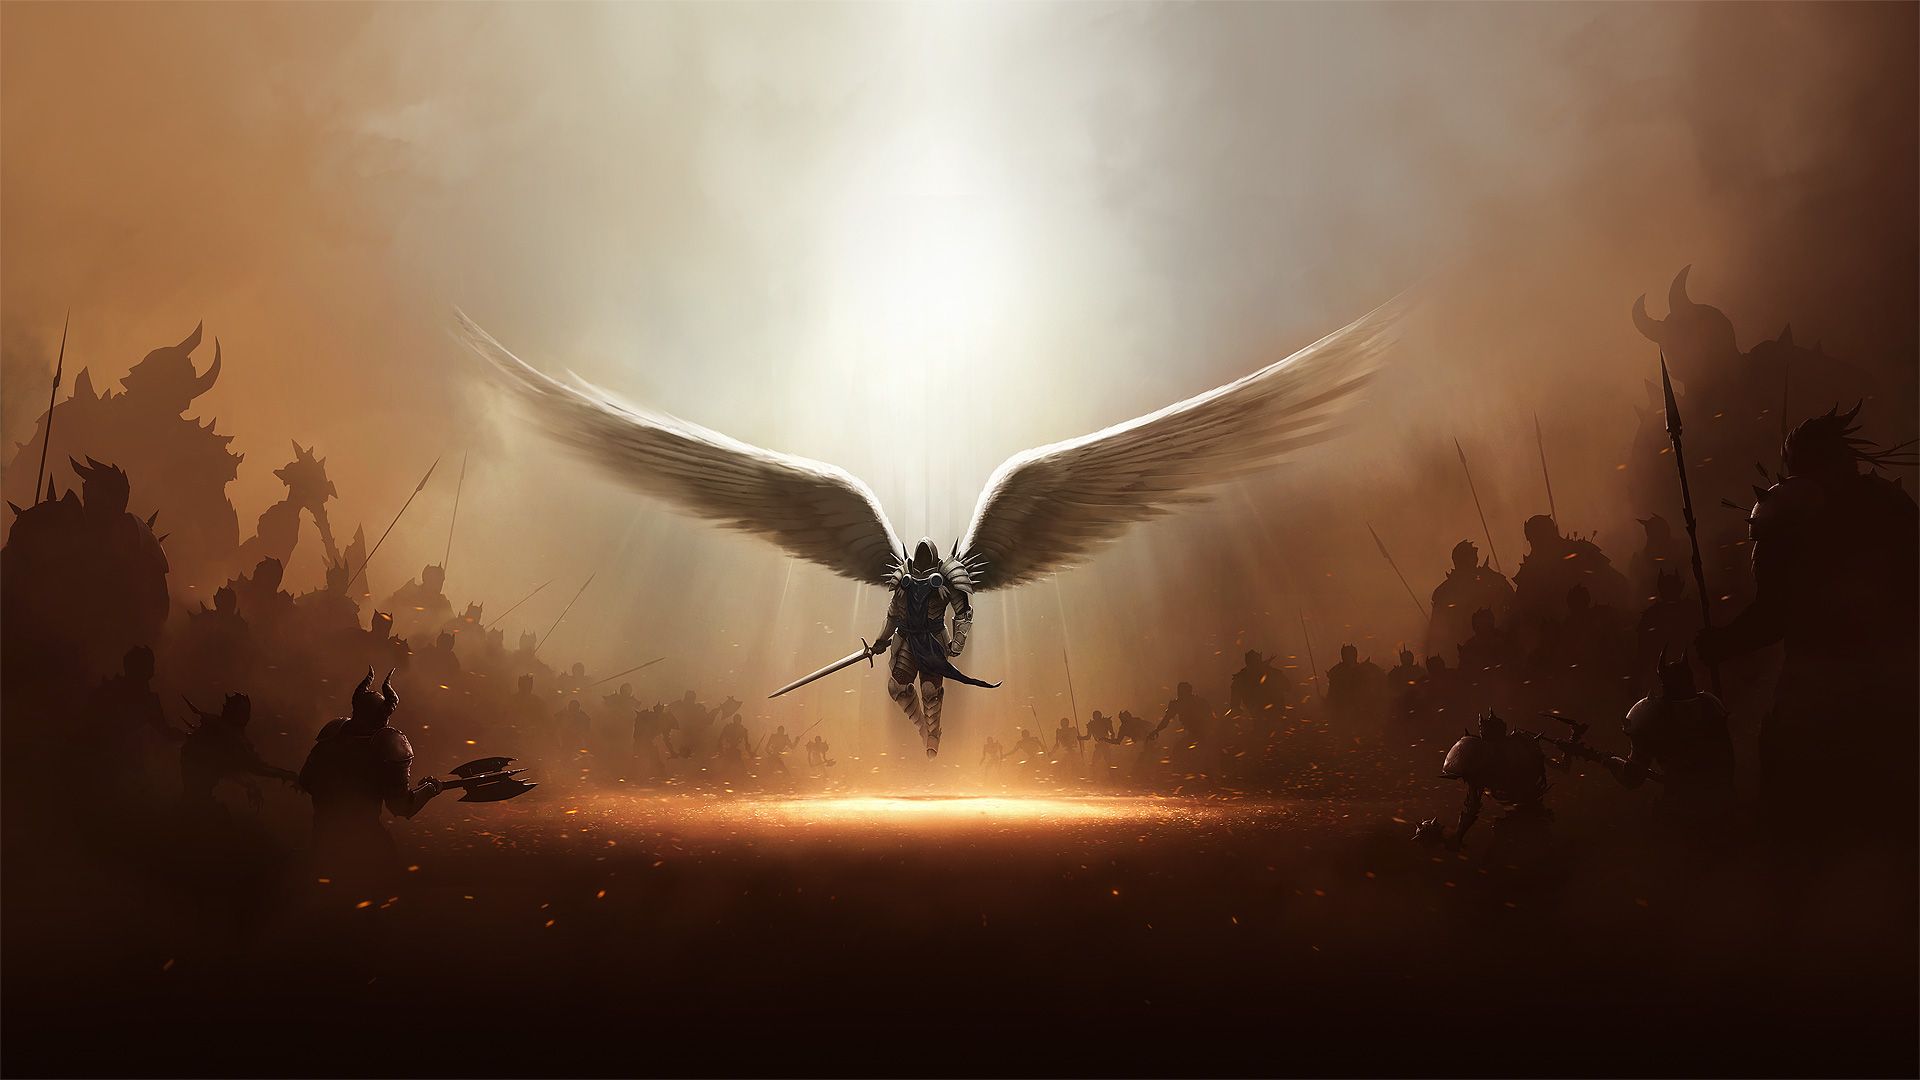 The Archangel Tyreal x post from / r / wallpapers Diablo